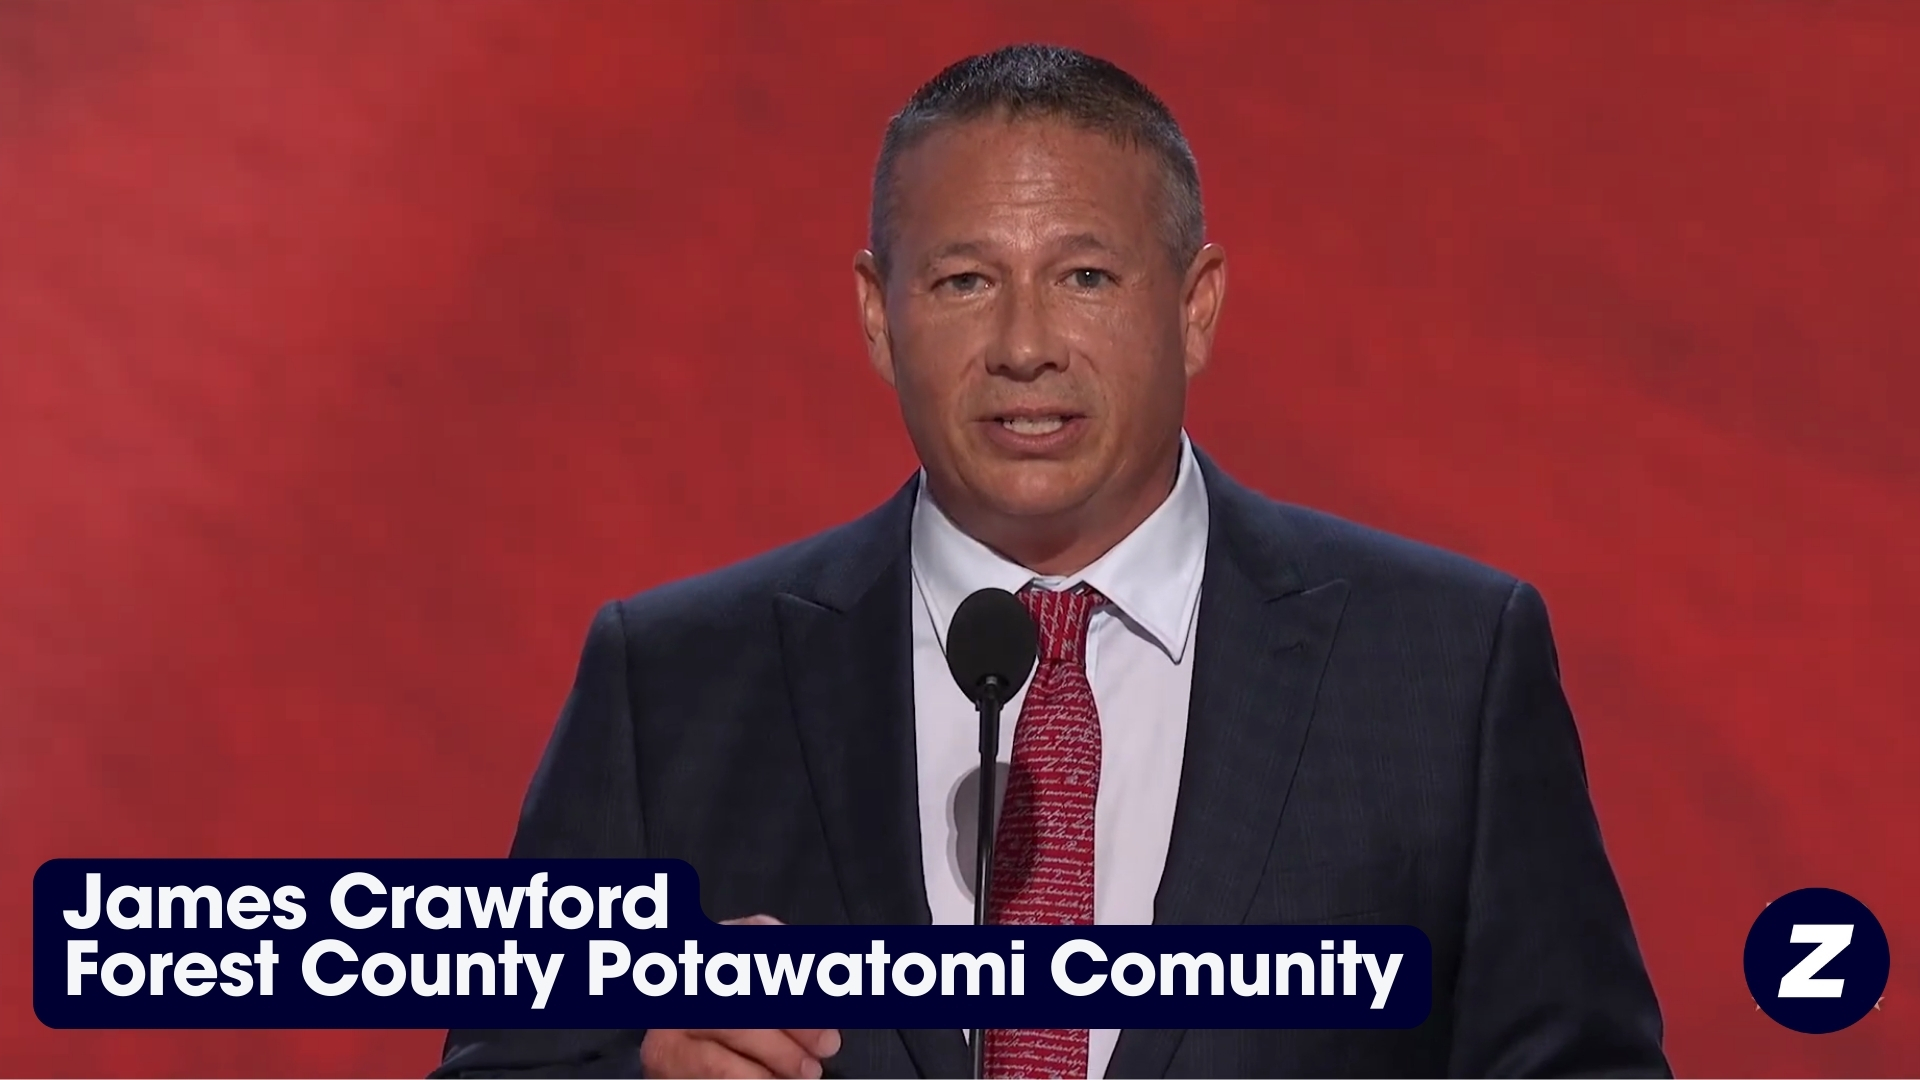 VIDEO: James Crawford, Chairman of Forest County Potawatomi Community, at Republican Convention